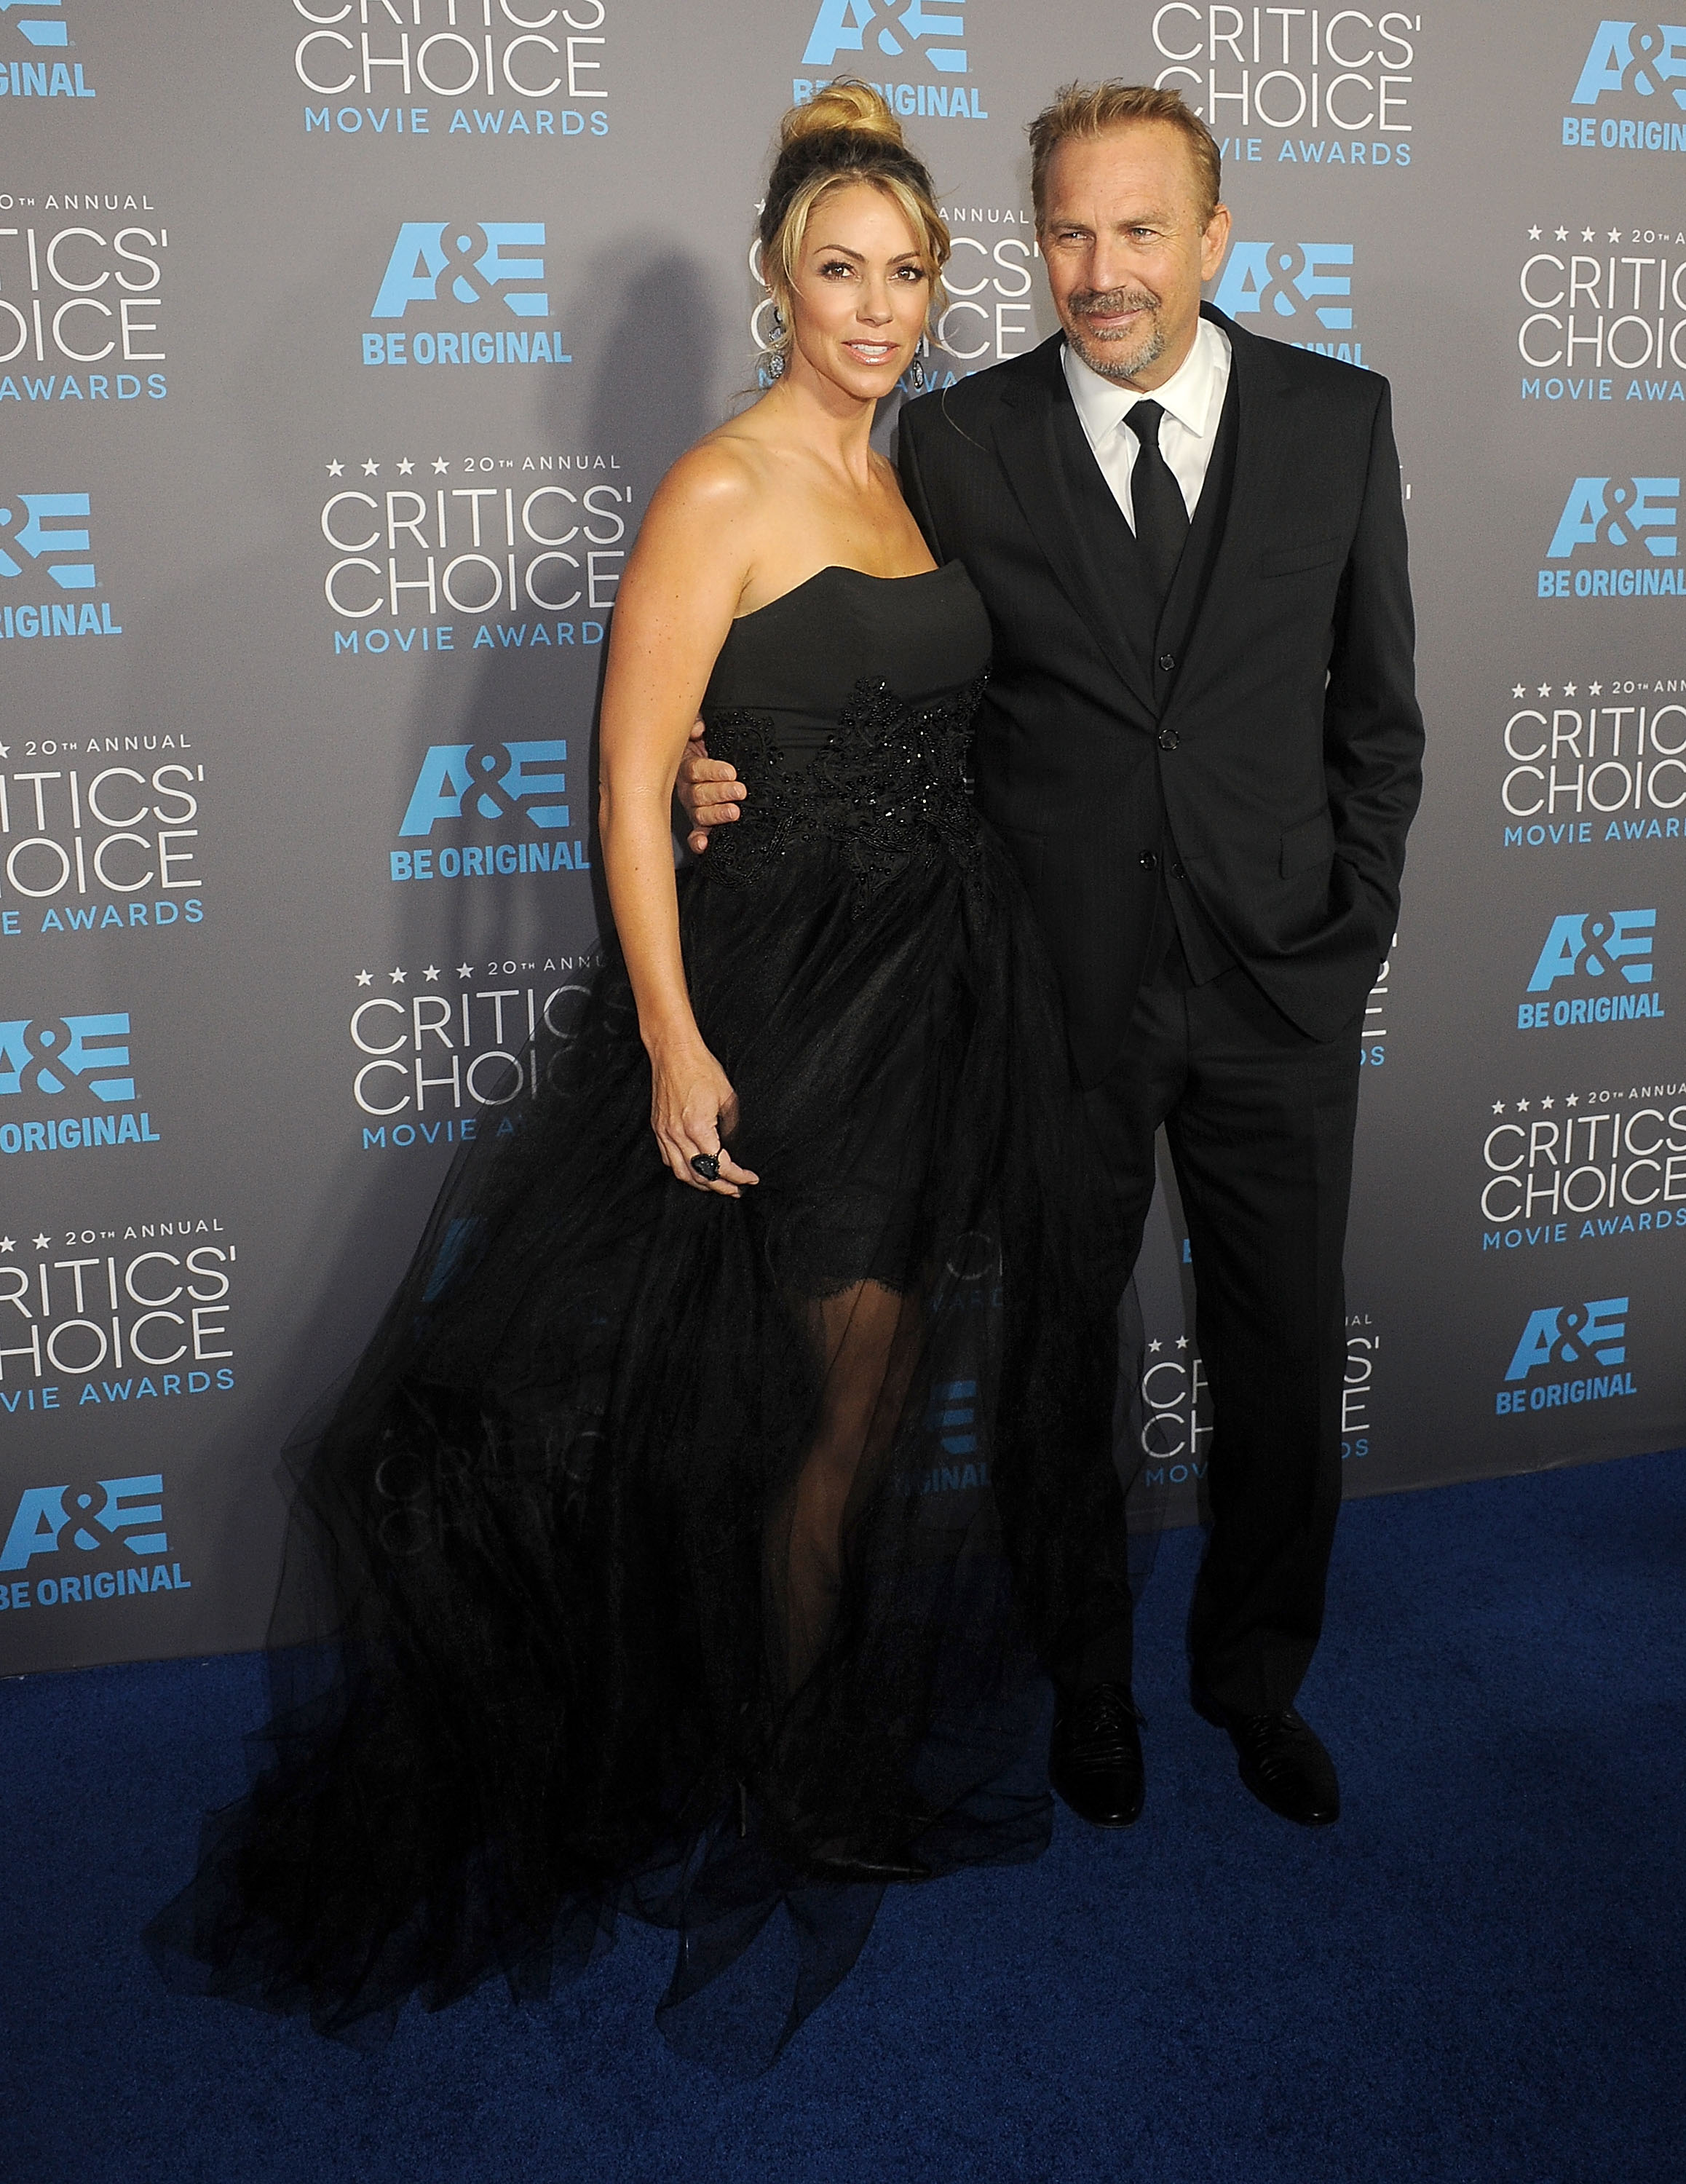 Kevin Costner and wife Christine Baumgartner arrive at the 20th Annual Critics' Choice Movie Awards at Hollywood Palladium on January 15, 2015, in Los Angeles, California. | Source: Getty Images